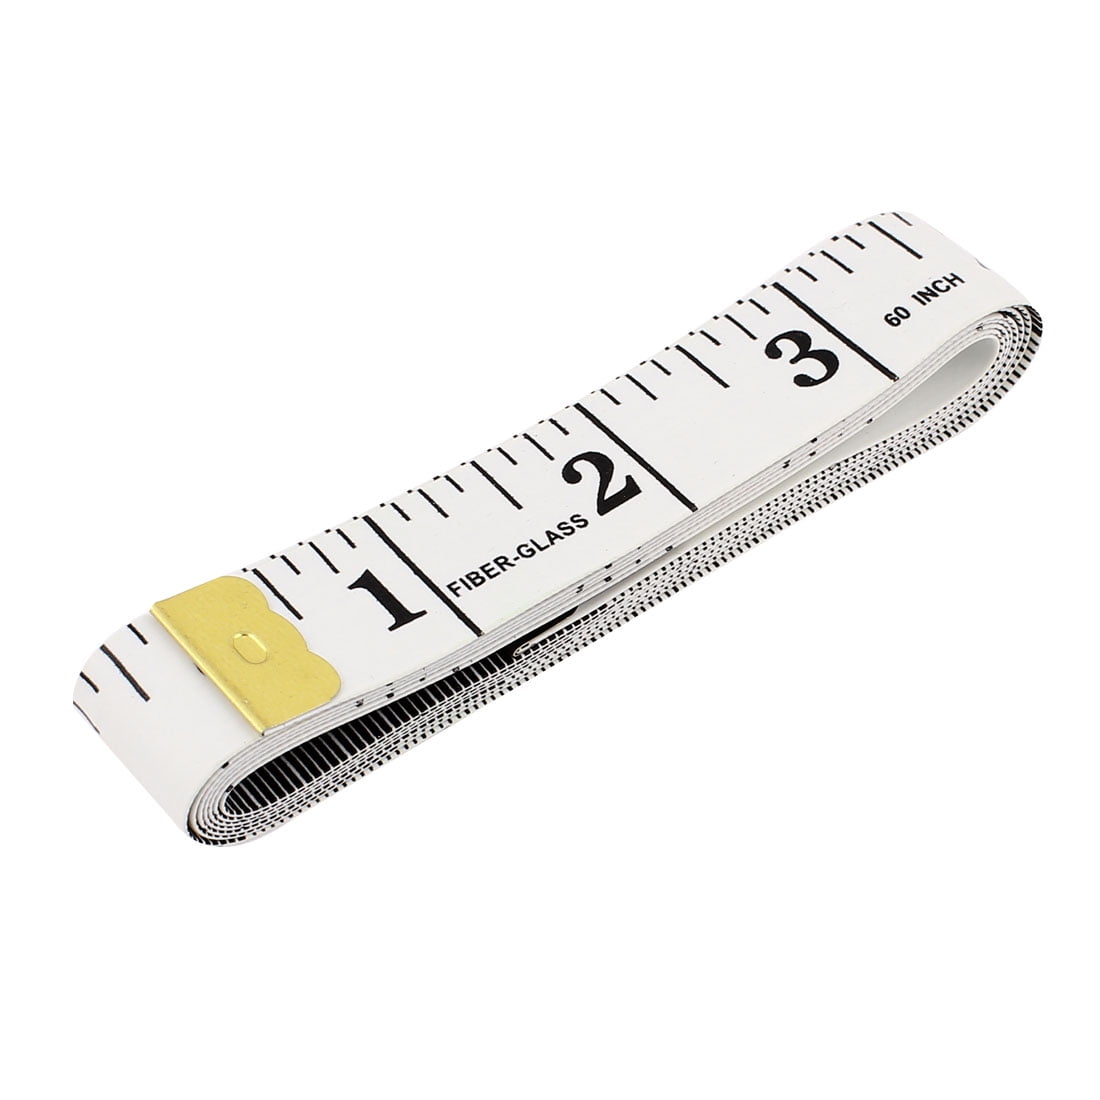 BODY MEASURING RULER SEWING CLOTH TAILOR SOFT FLAT 60IN 150CM L6C0 